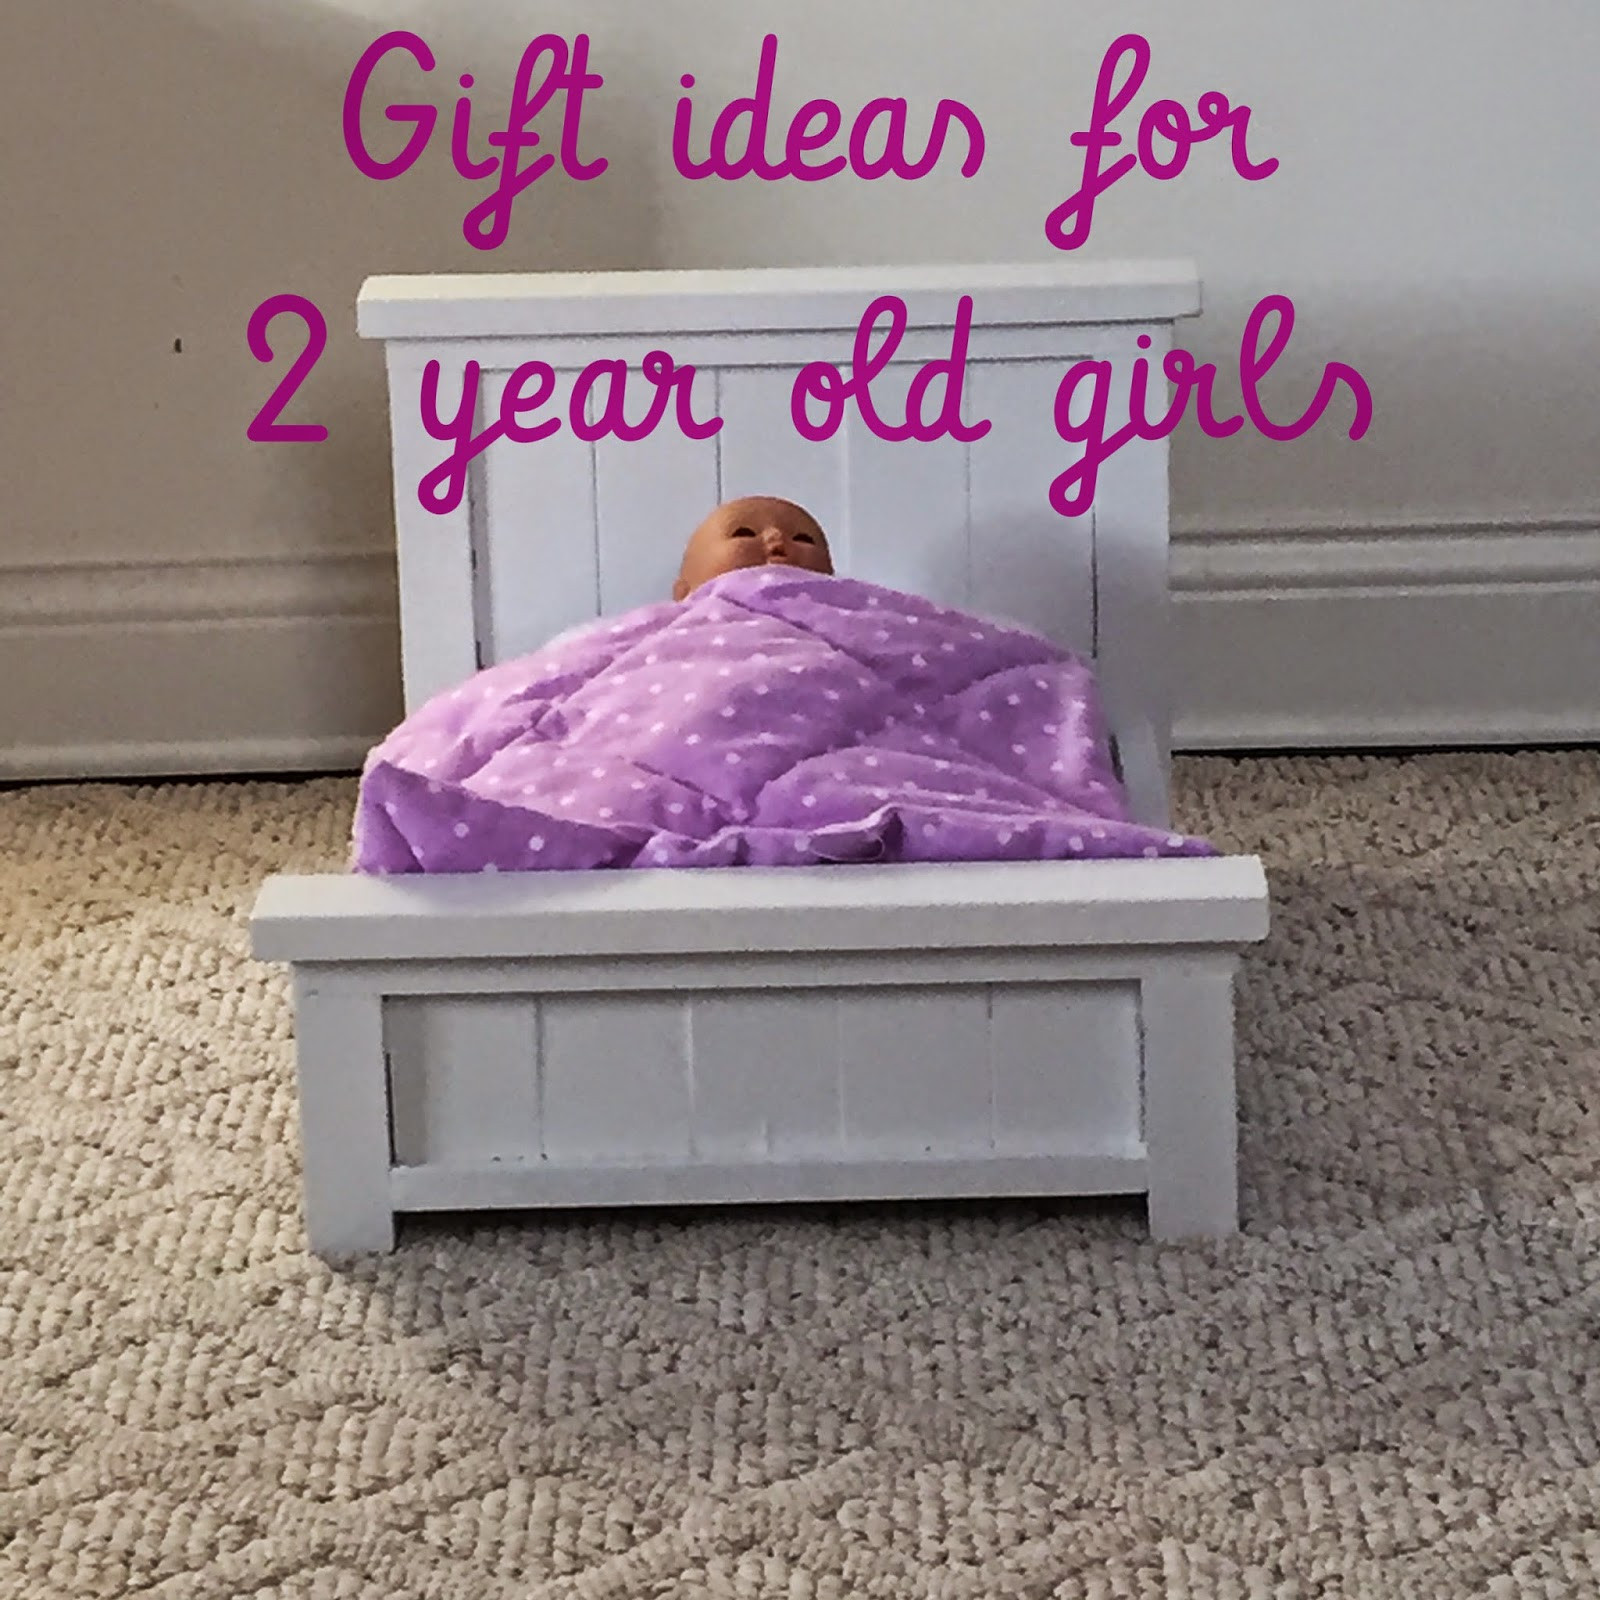 2 Yr Old Girl Birthday Gift Ideas
 Our Delicious Life Gift Ideas for 2 Year Old Girls